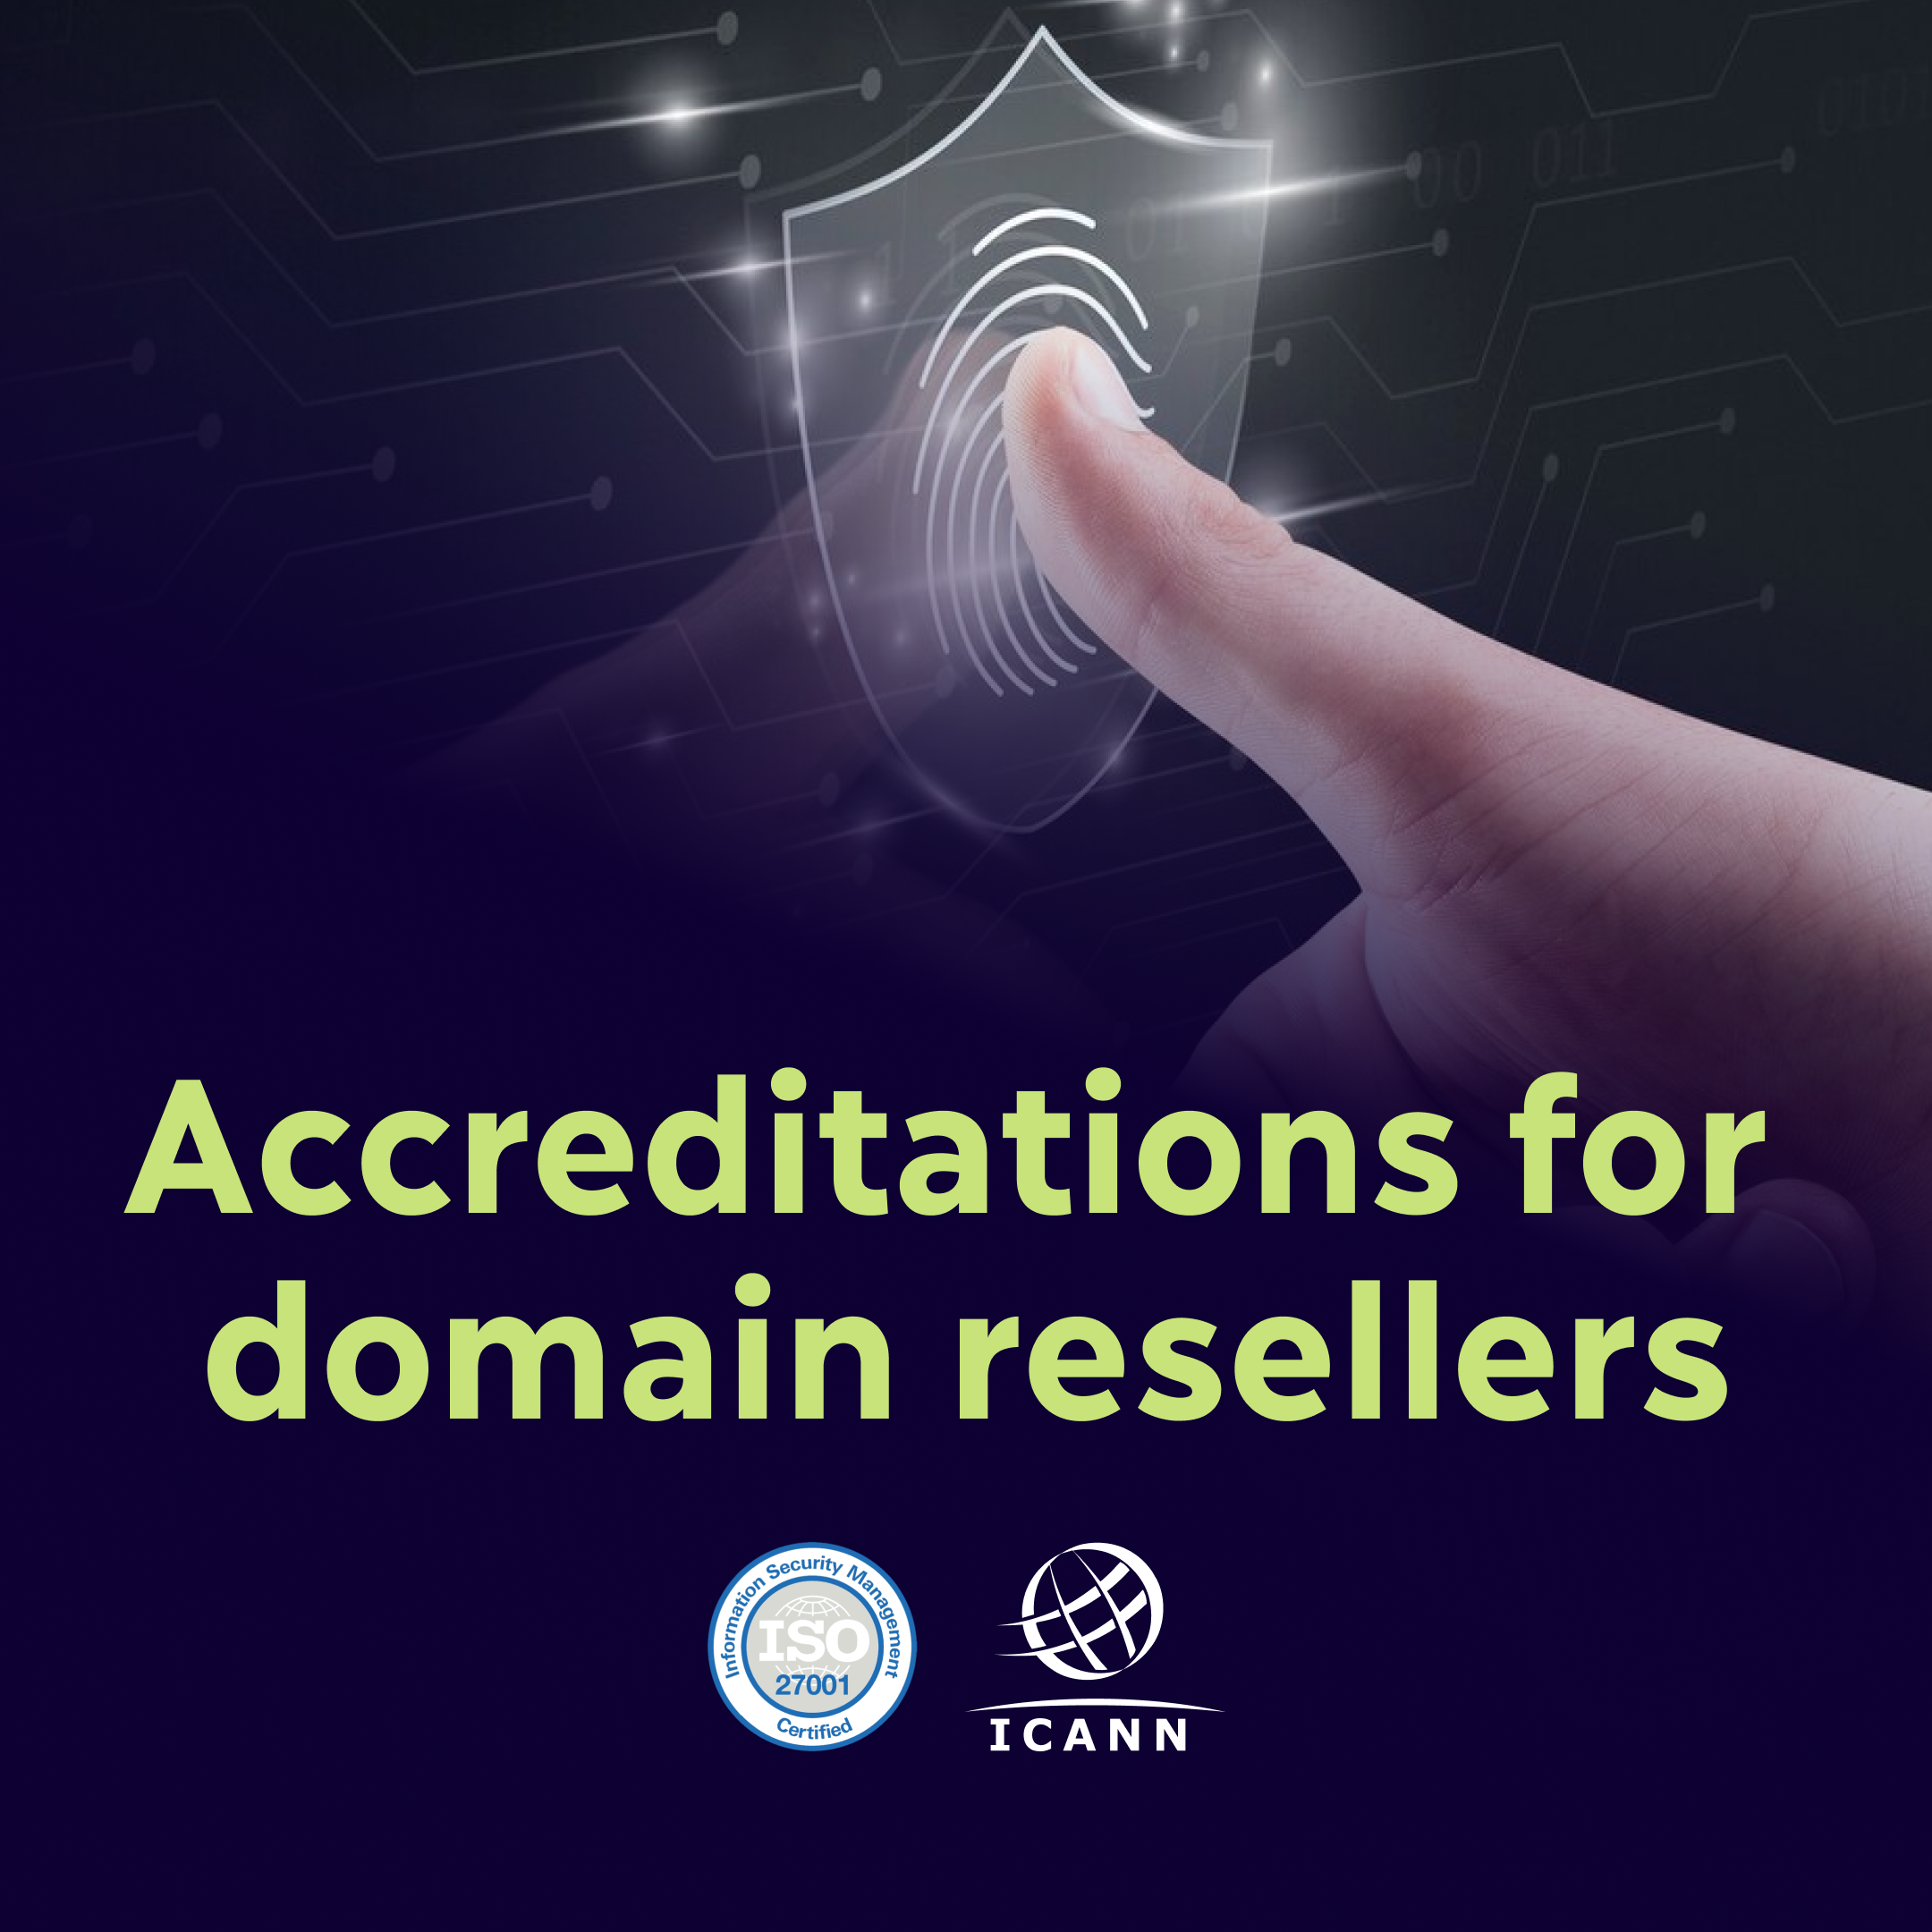 3 accreditations for domain resellers